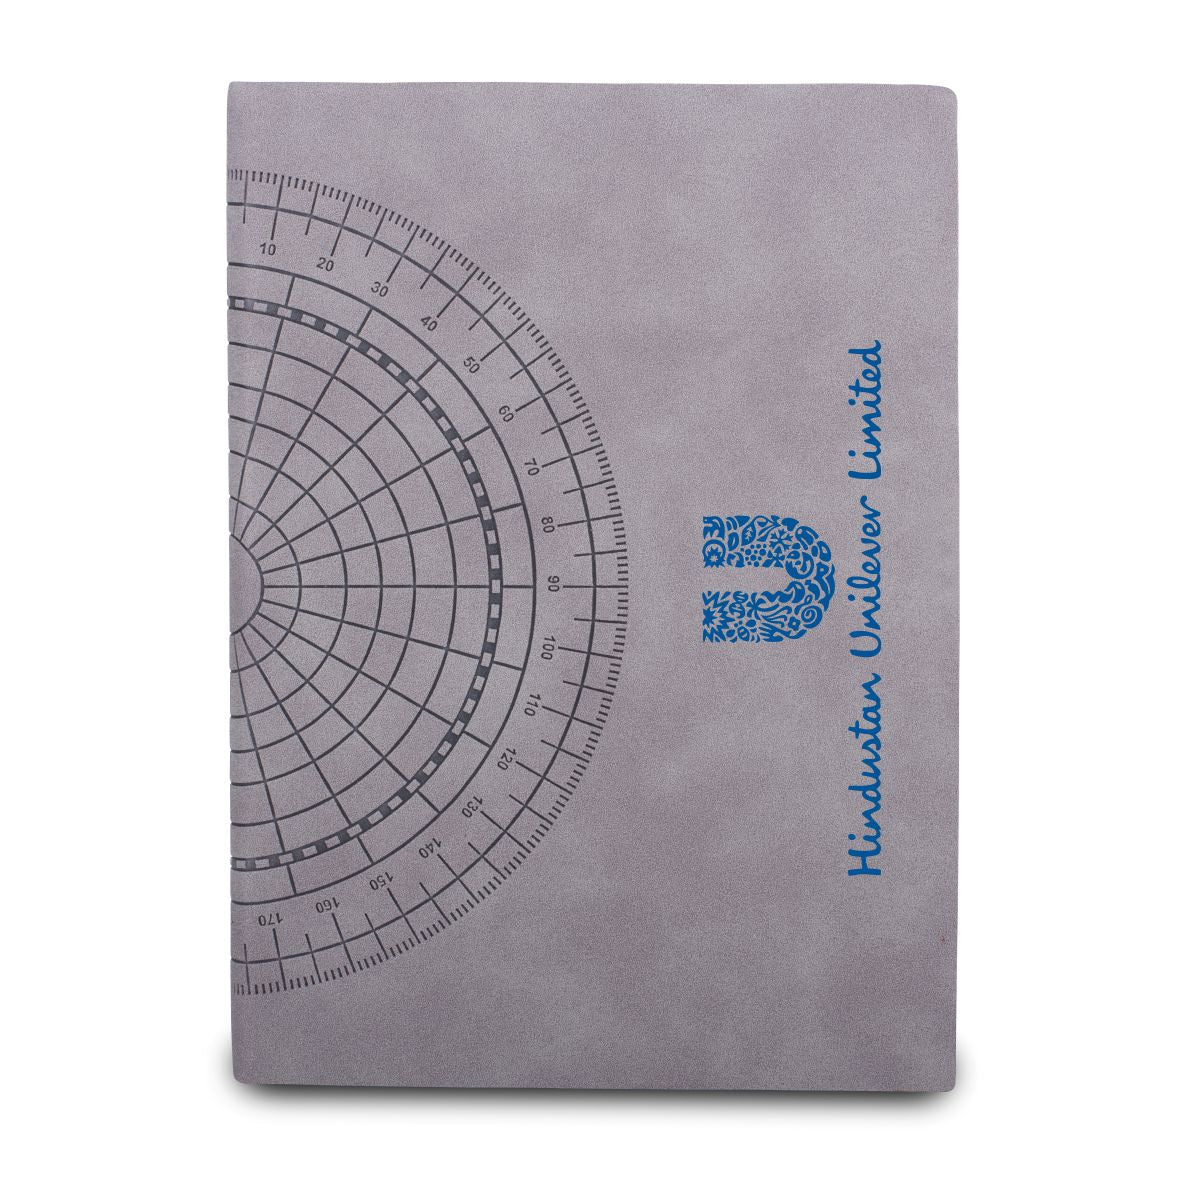 A5 Size Corporate Notebook Diary - For Office Use, Personal Use, or Corporate Gifting BG133